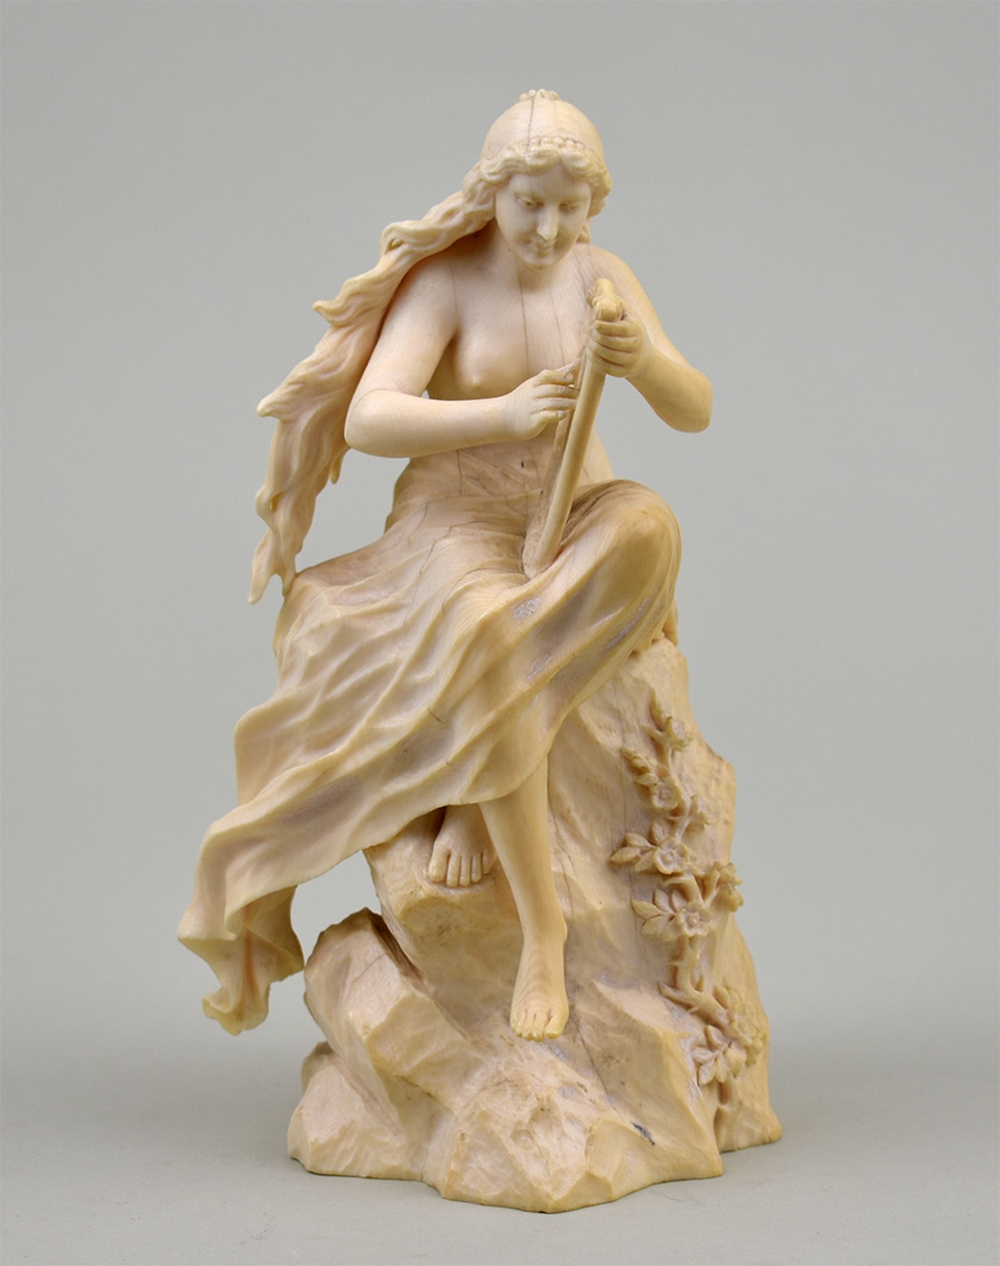 CONTENTIAL IVORY FIGURE OF A CLASSICAL